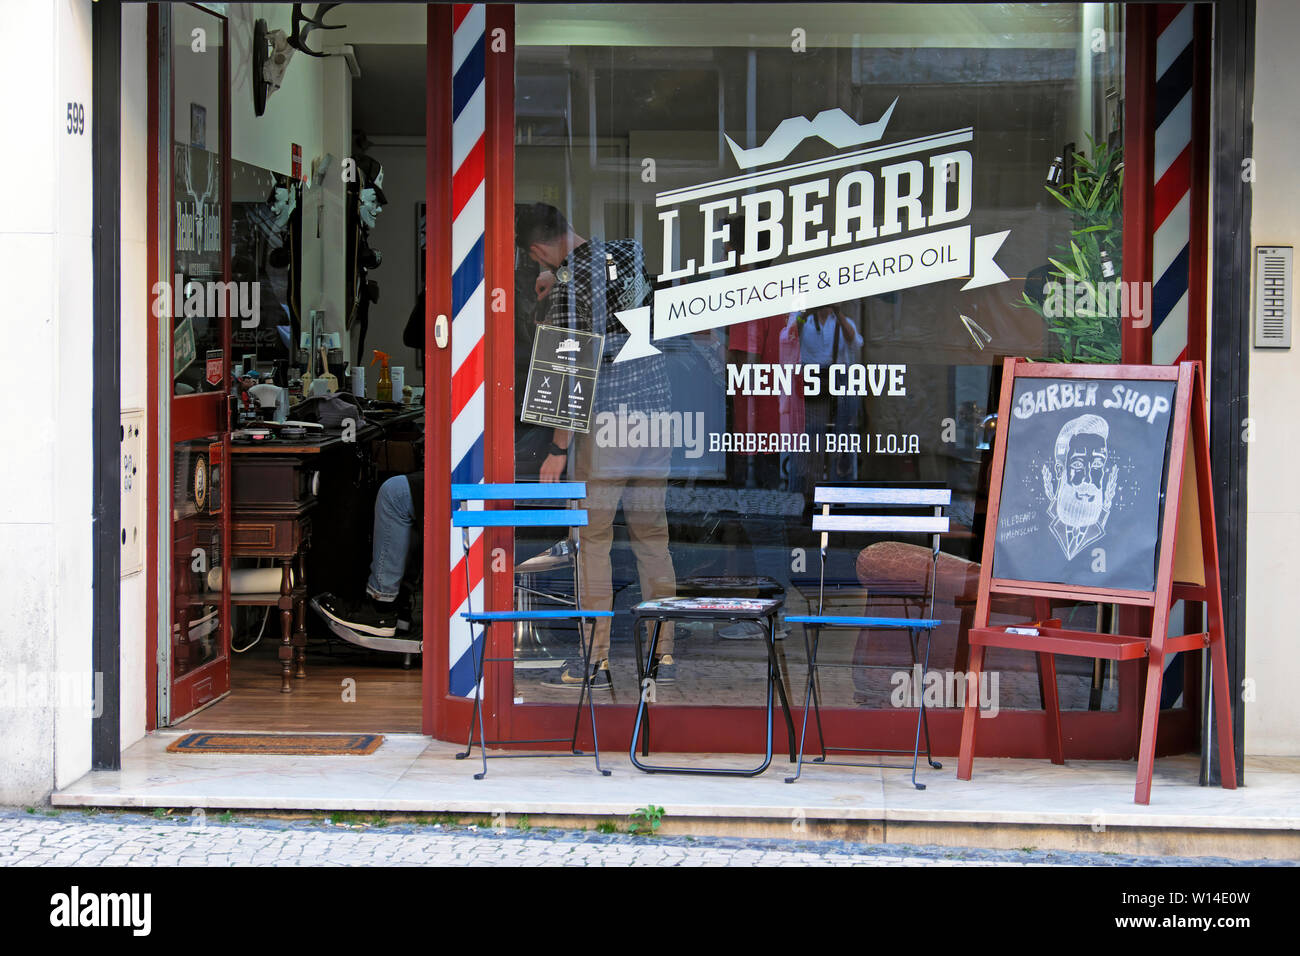 Barber Shop LeBeard outside view of hipster storefront and window graphics signs on Rua de Cedofeita in Porto Portugal Europe  KATHY DEWITT Stock Photo